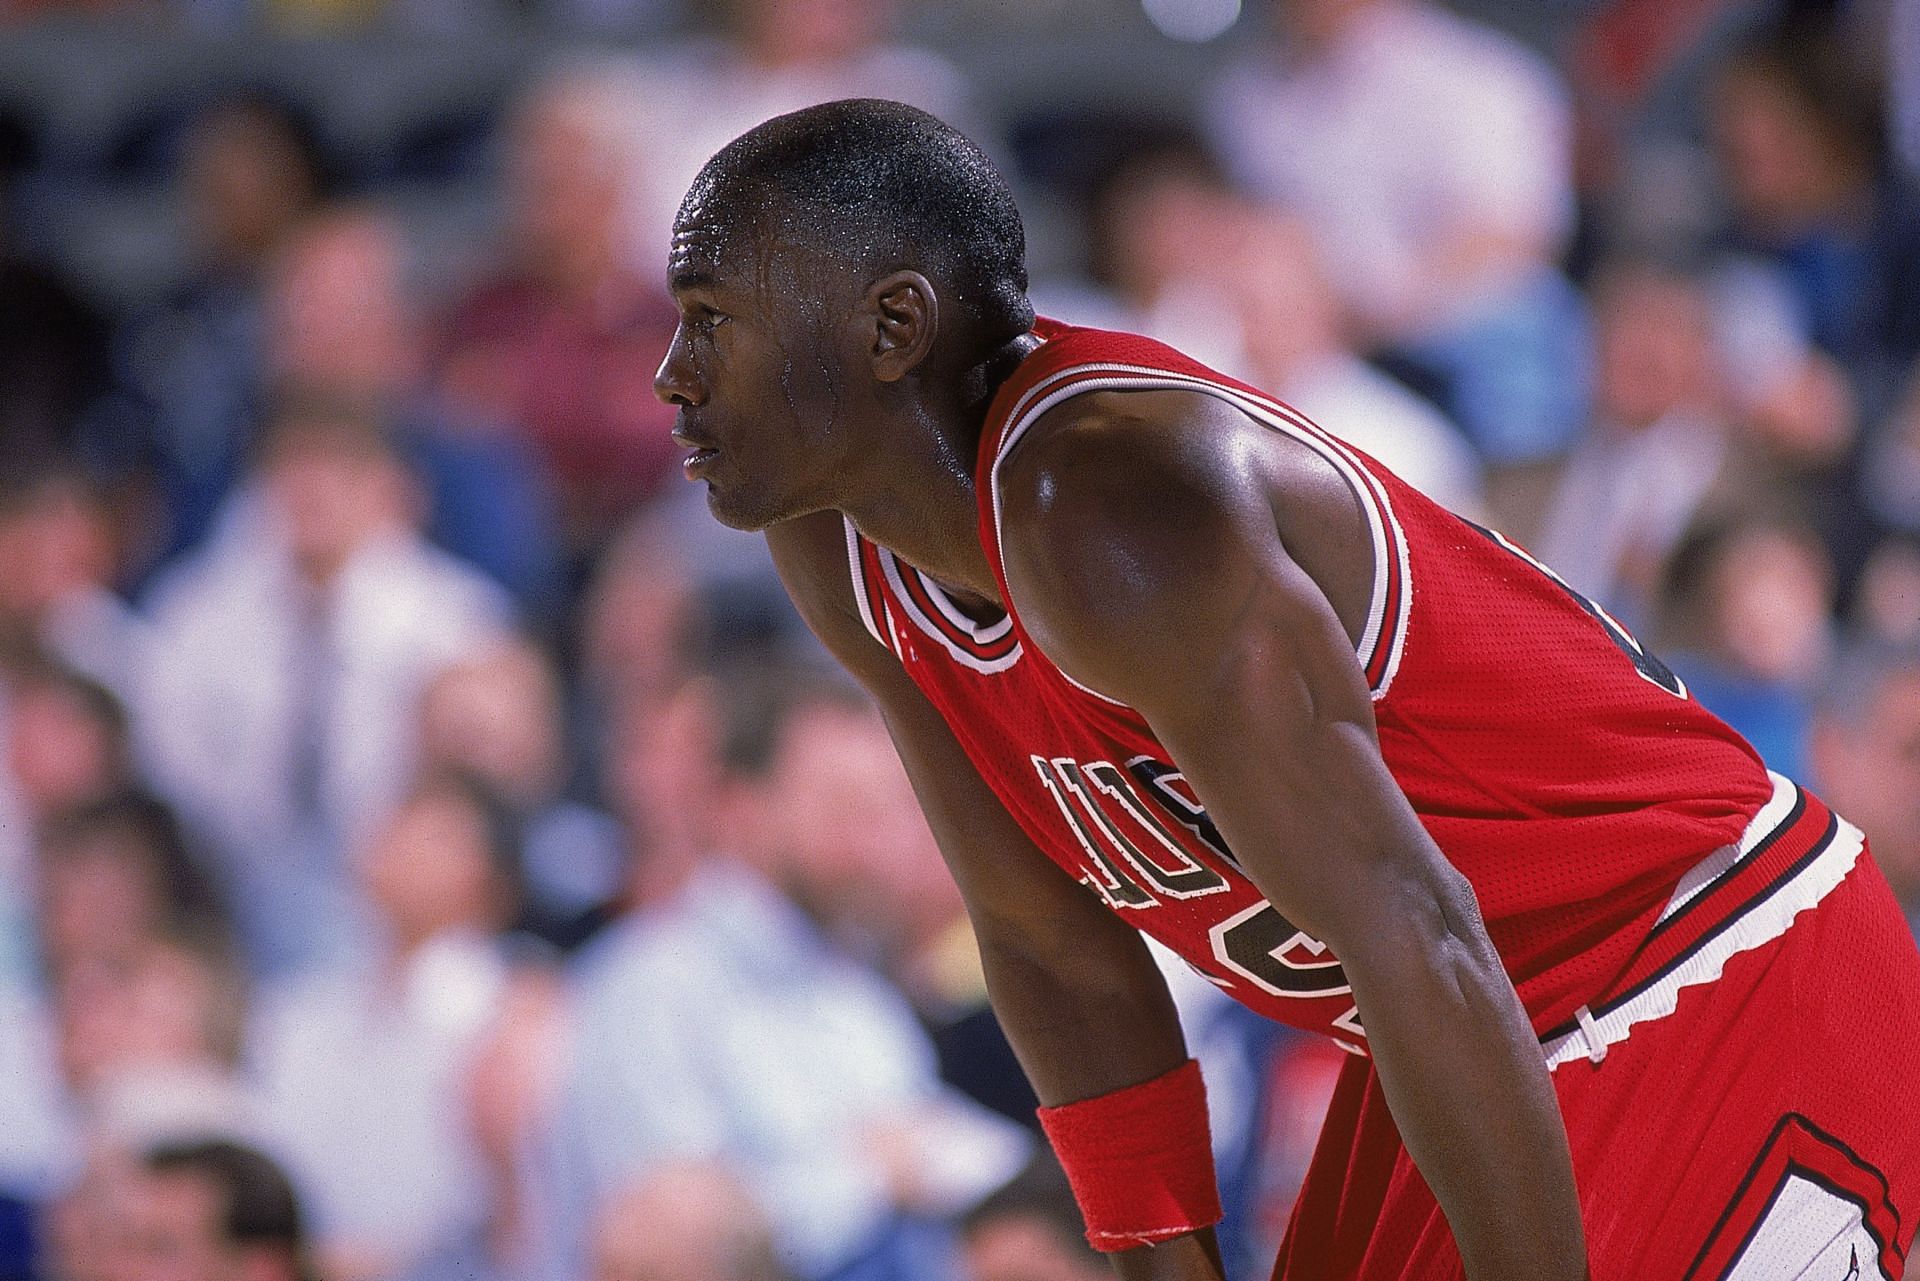 Michael Jordan during his time with the Chicago Bulls.